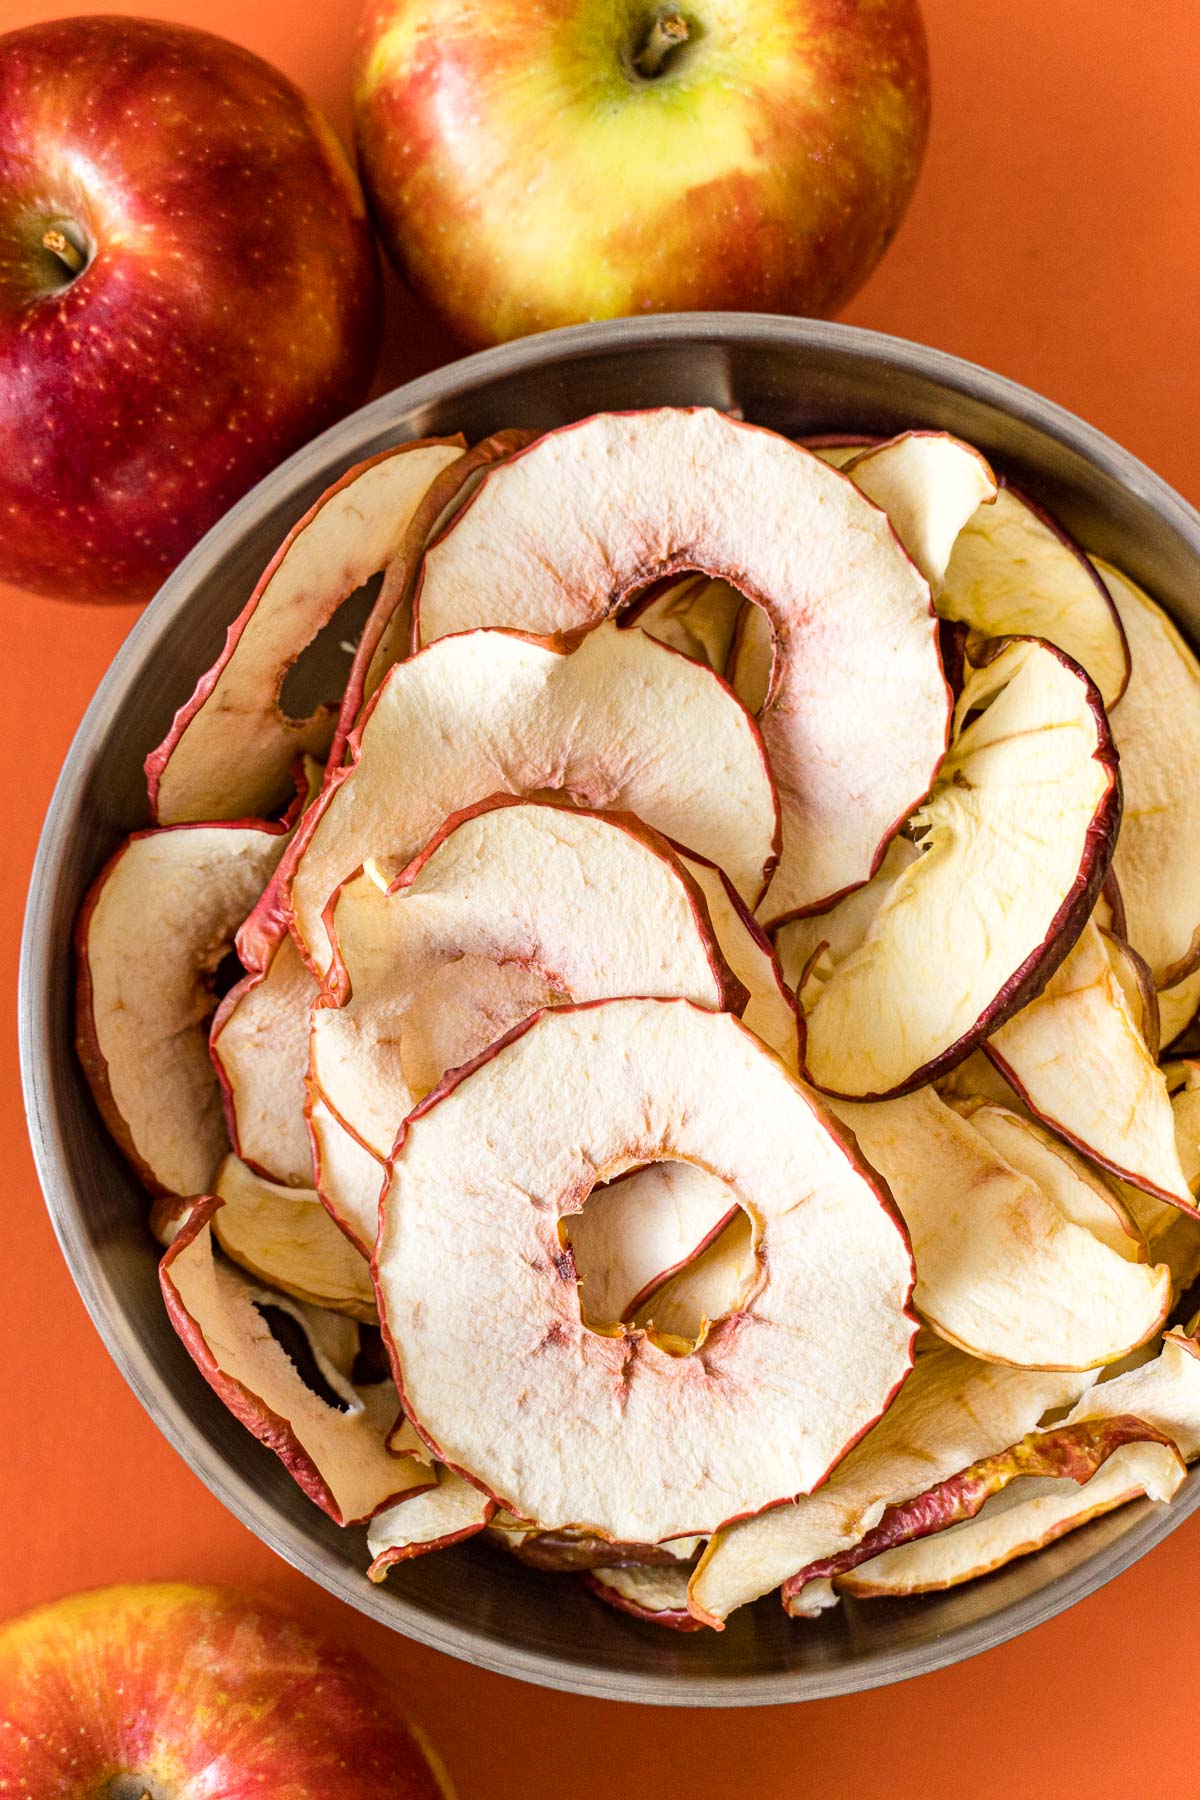 Dehydrated apples in a bowl